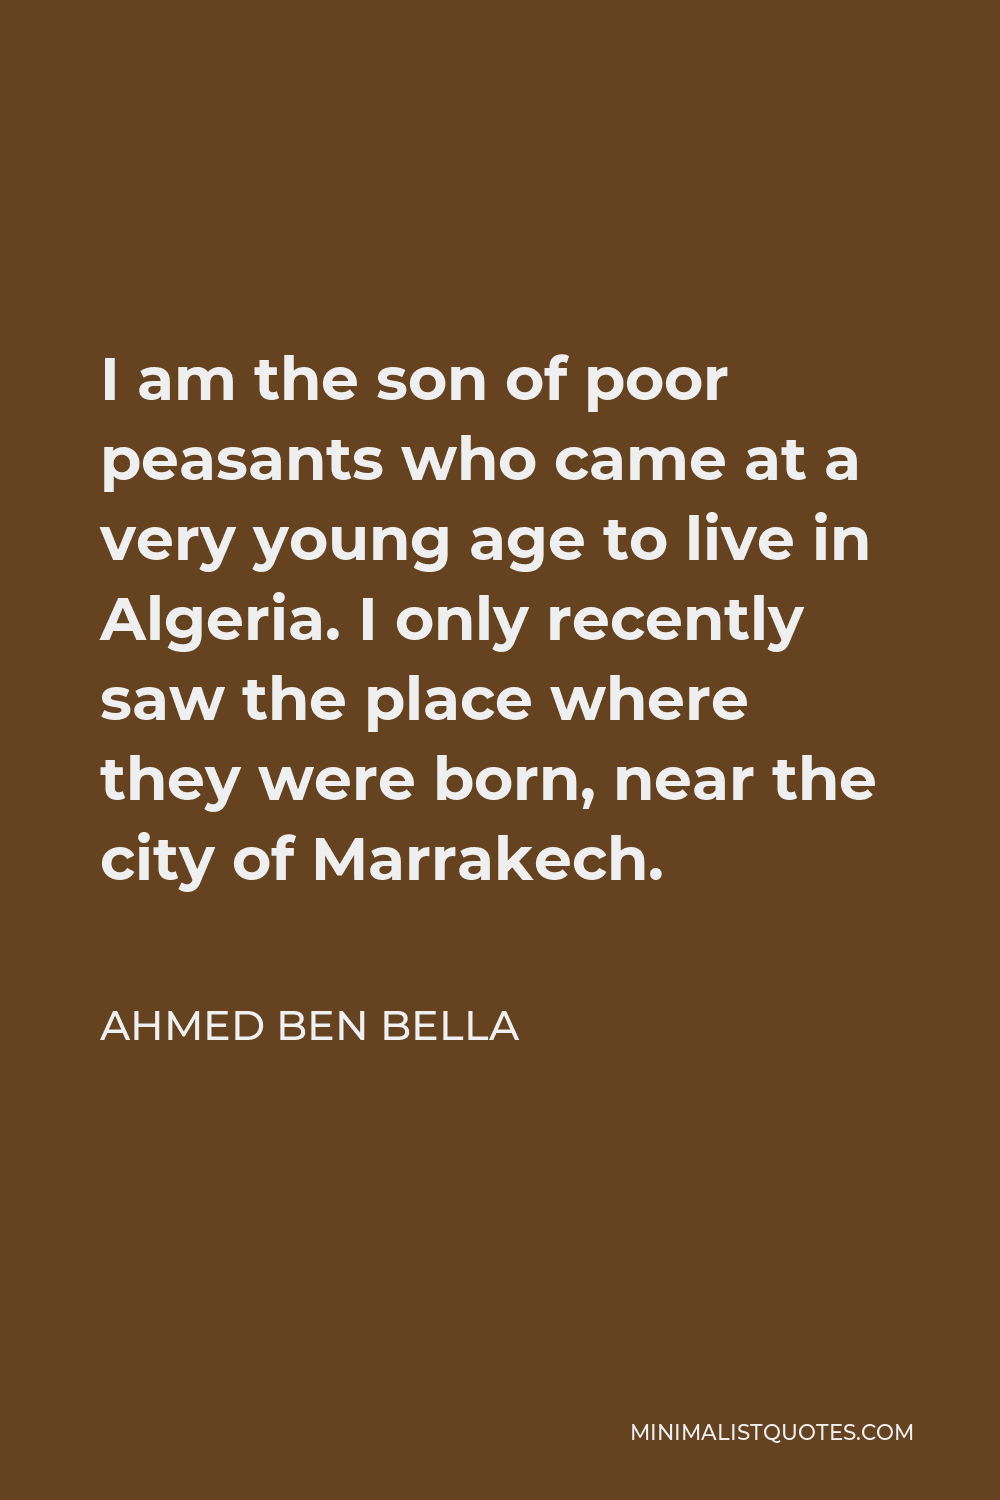 Ahmed Ben Bella Quote - I am the son of poor peasants who came at a very young age to live in Algeria. I only recently saw the place where they were born, near the city of Marrakech.